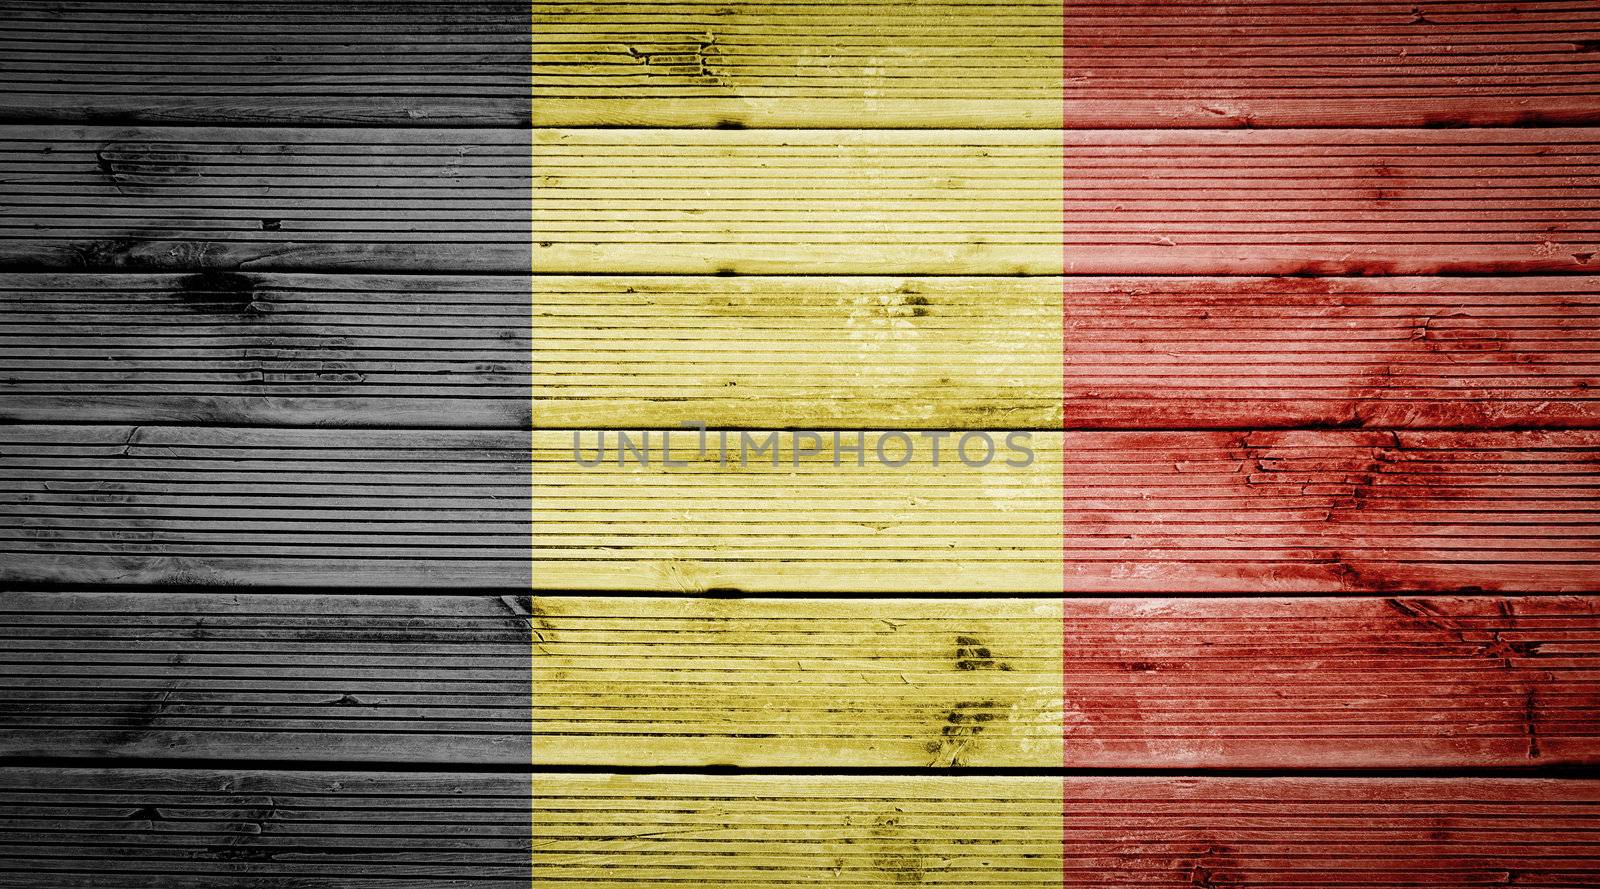 Natural wood planks texture background with the colors of the flag of Belgium